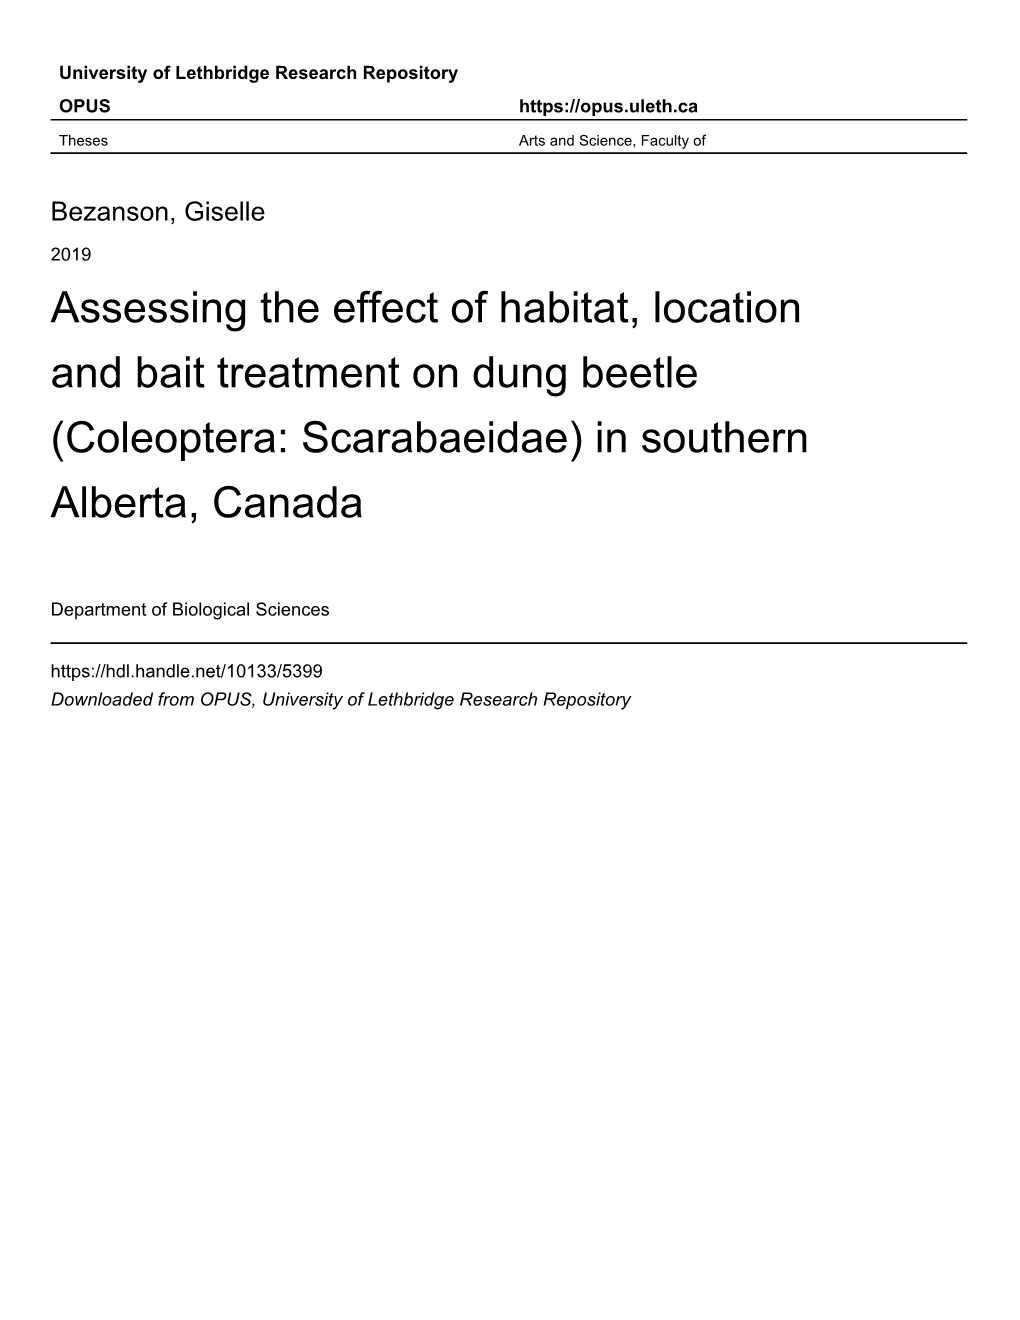 Assessing the Effect of Habitat, Location and Bait Treatment on Dung Beetle (Coleoptera: Scarabaeidae) in Southern Alberta, Canada